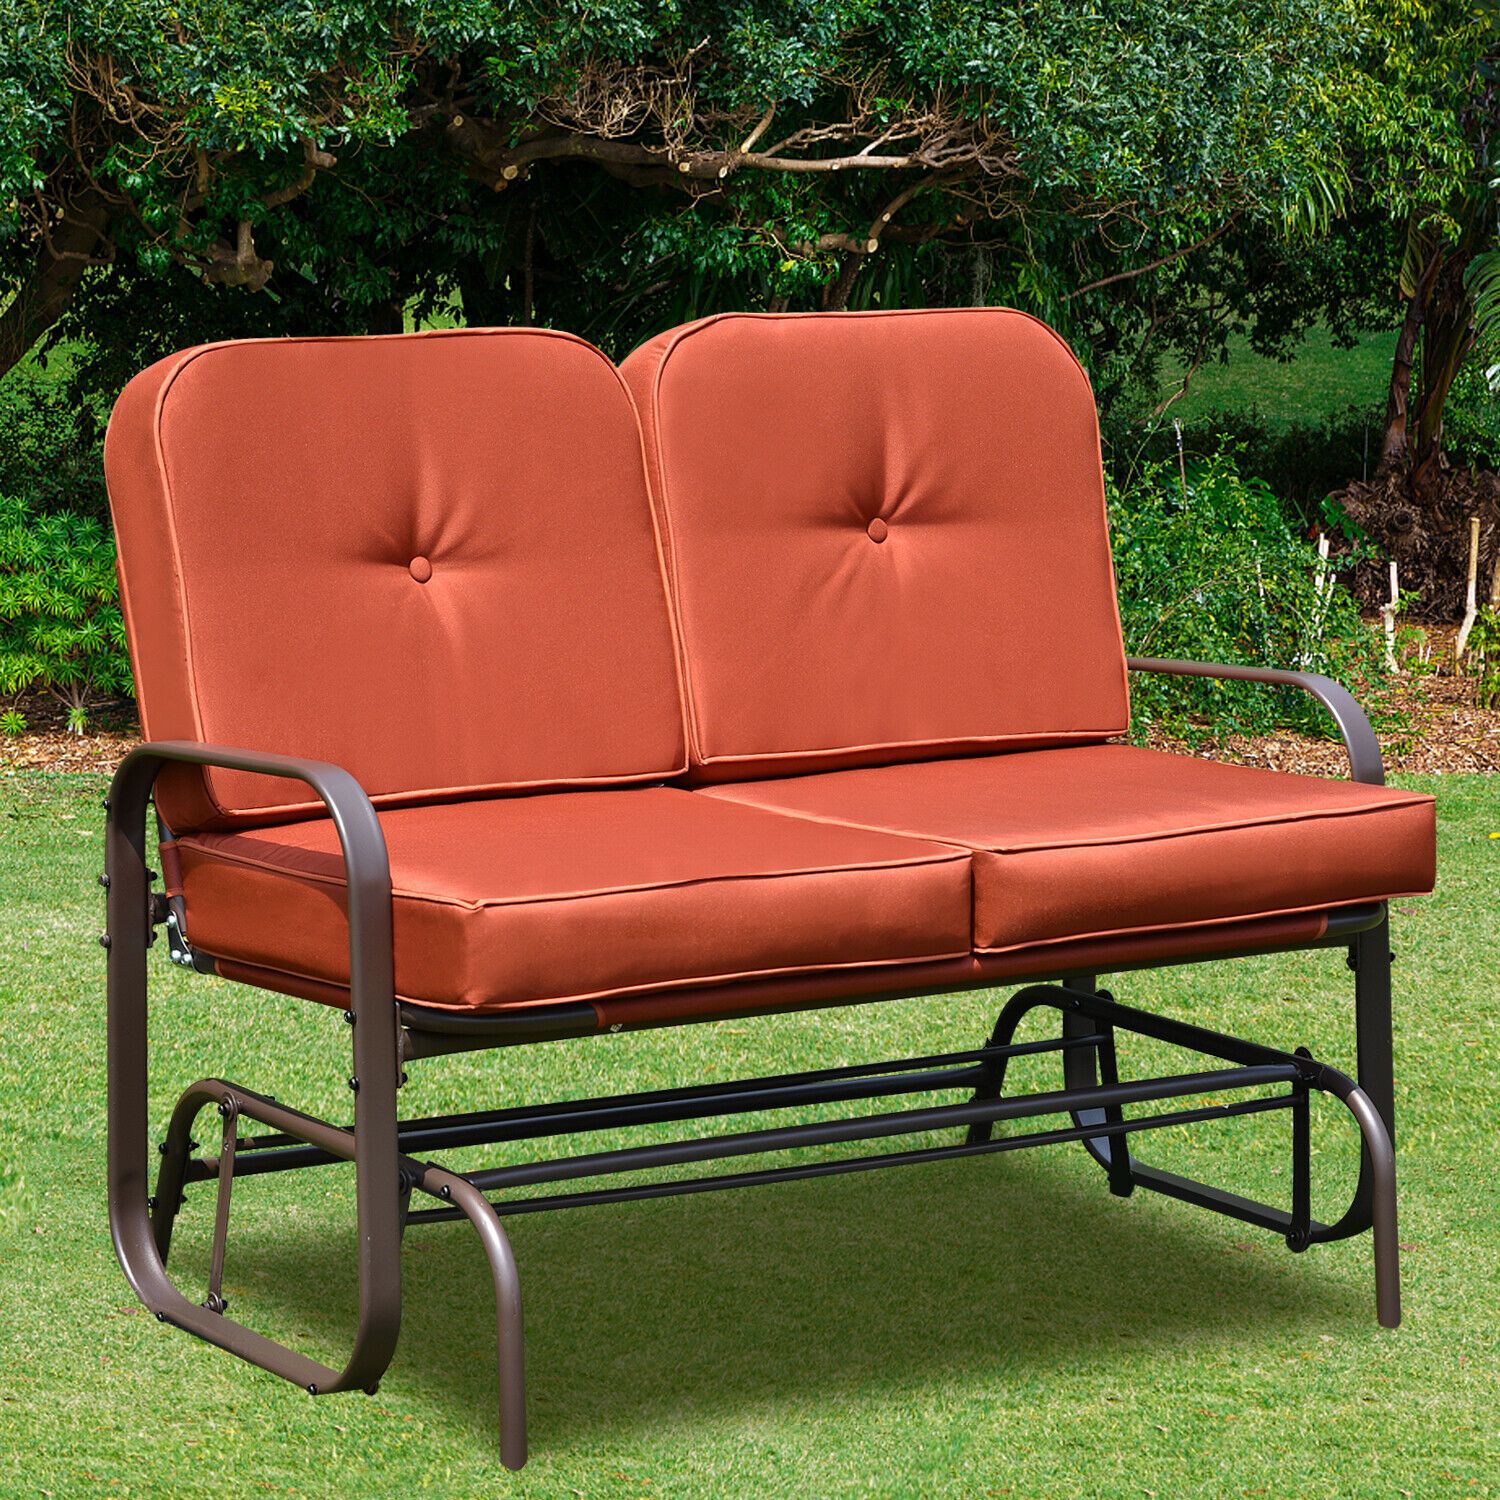 Patio Glider Bench Chair 2 Person Rocker Loveseat Outdoor Furniture W/  Cushions Throughout Glider Benches With Cushions (View 21 of 25)